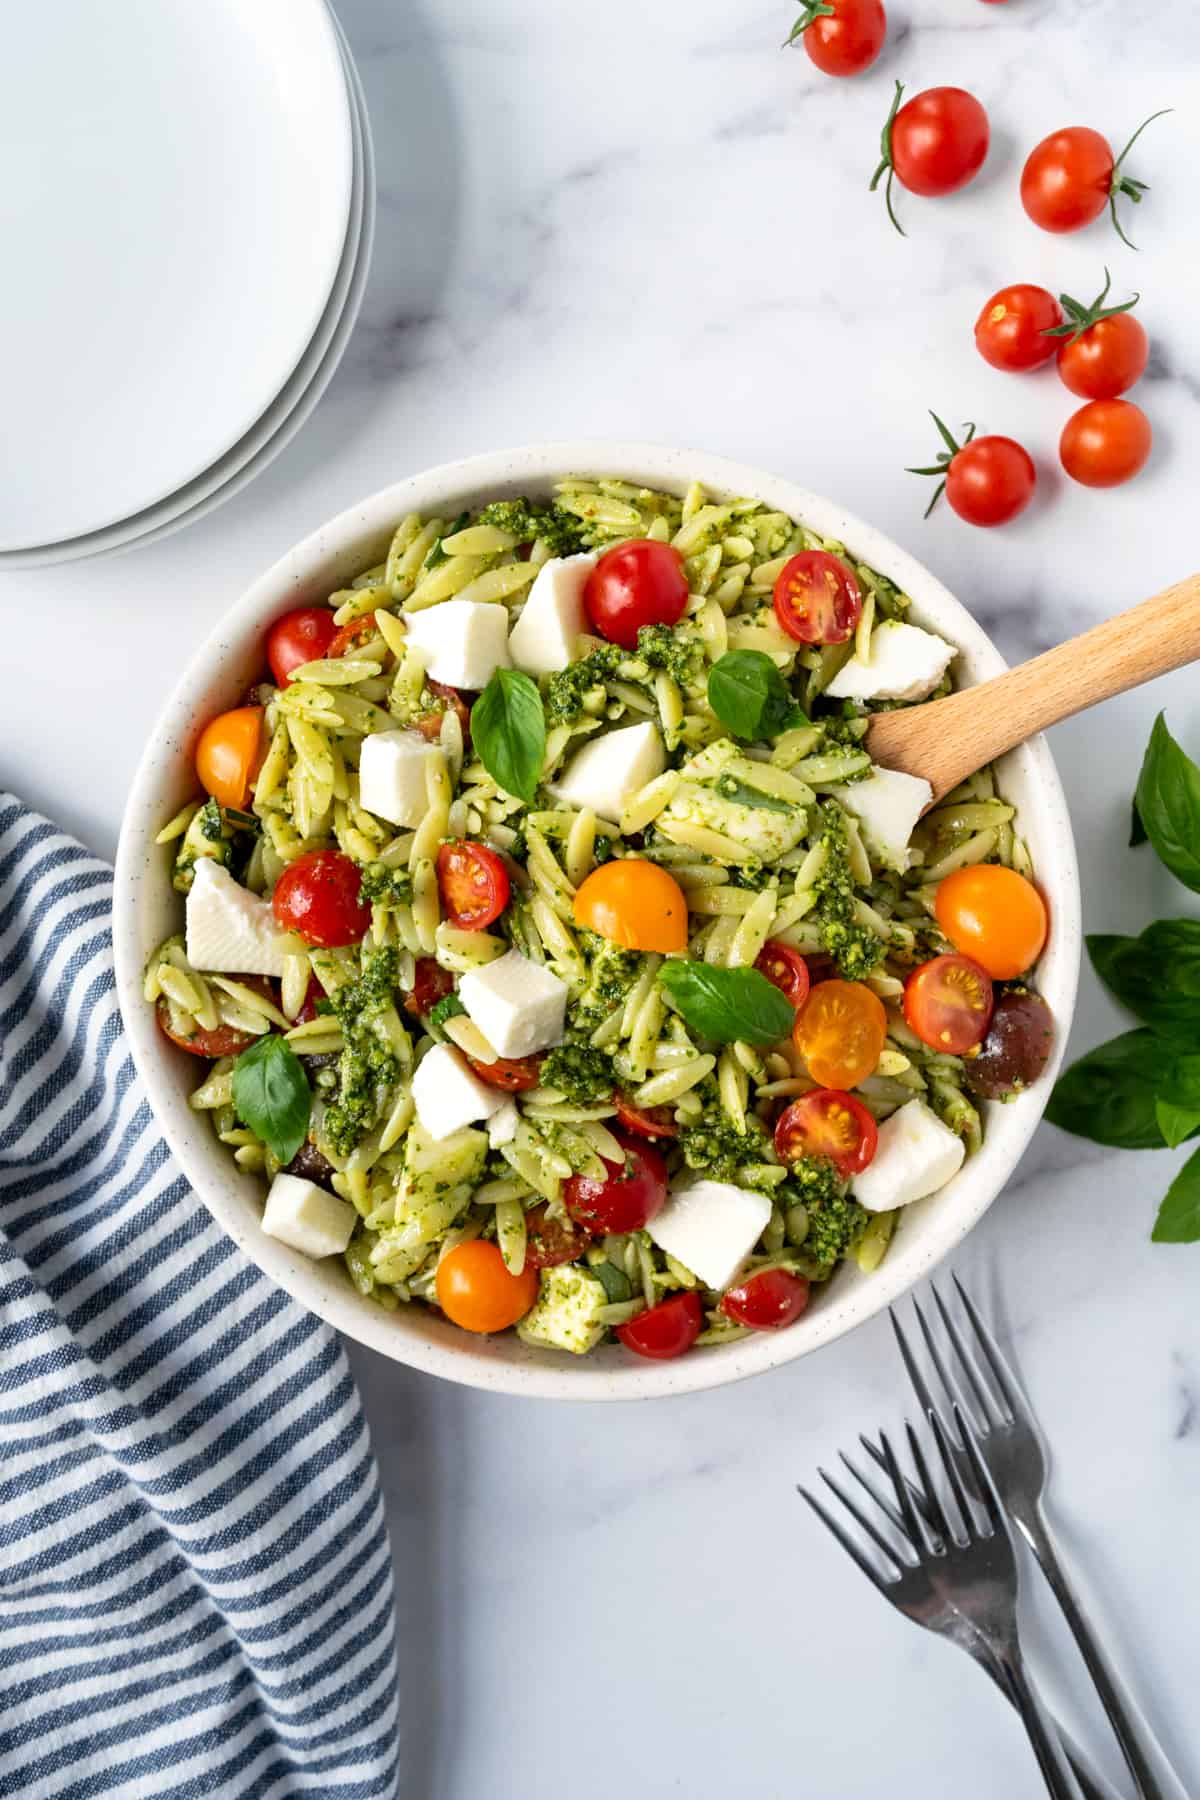 Pesto Orzo Salad in a white bowl with a wooden spoon.